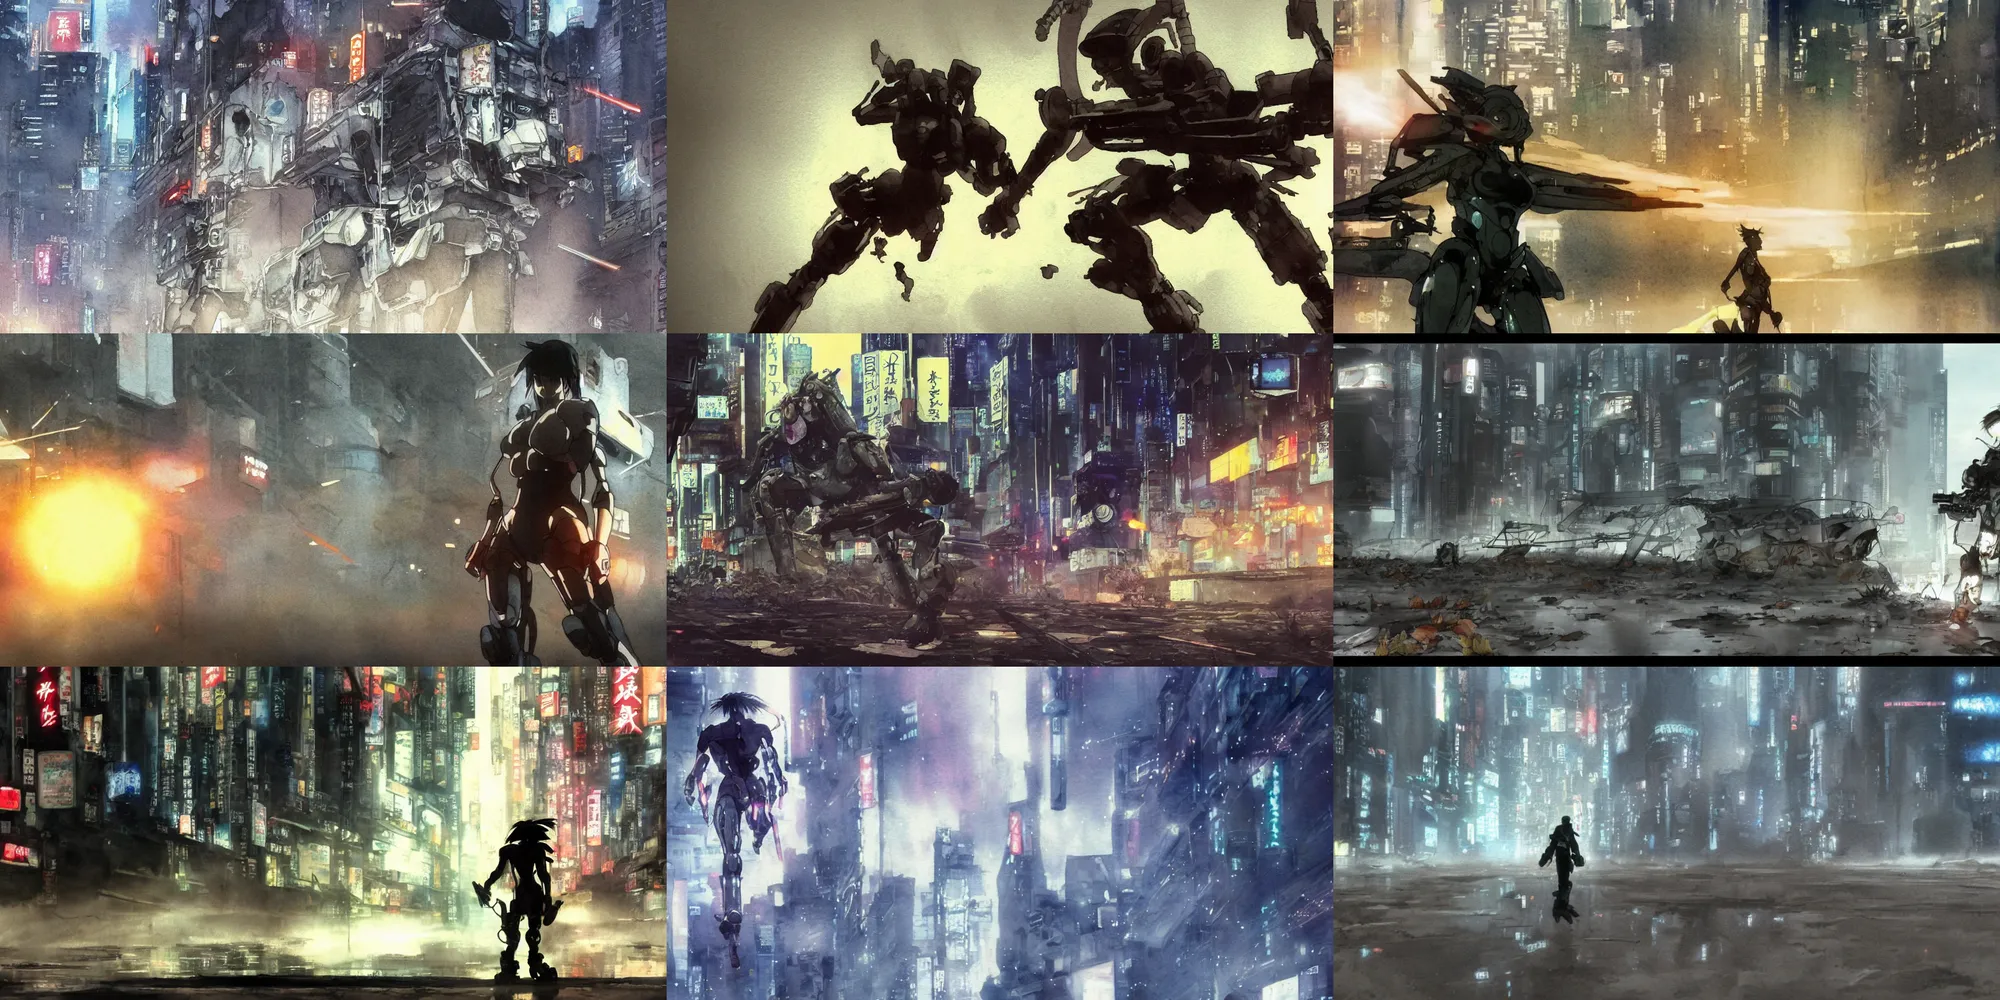 Prompt: incredible screenshot, simple watercolor, masamune shirow ghost in the shell movie scene close up broken Kusanagi tank battle, brown mud, dust, titanic tank with legs, robot arm, ripped to shreds, autumn leaves, karate kick , laser wip, lightning rollerblades up a skyscraper, light rain, shinjuku, reflections, refraction, bounce light, rim light, bokeh ,hd, 4k, remaster, dynamic camera angle, deep 3 point perspective, fish eye, dynamic scene